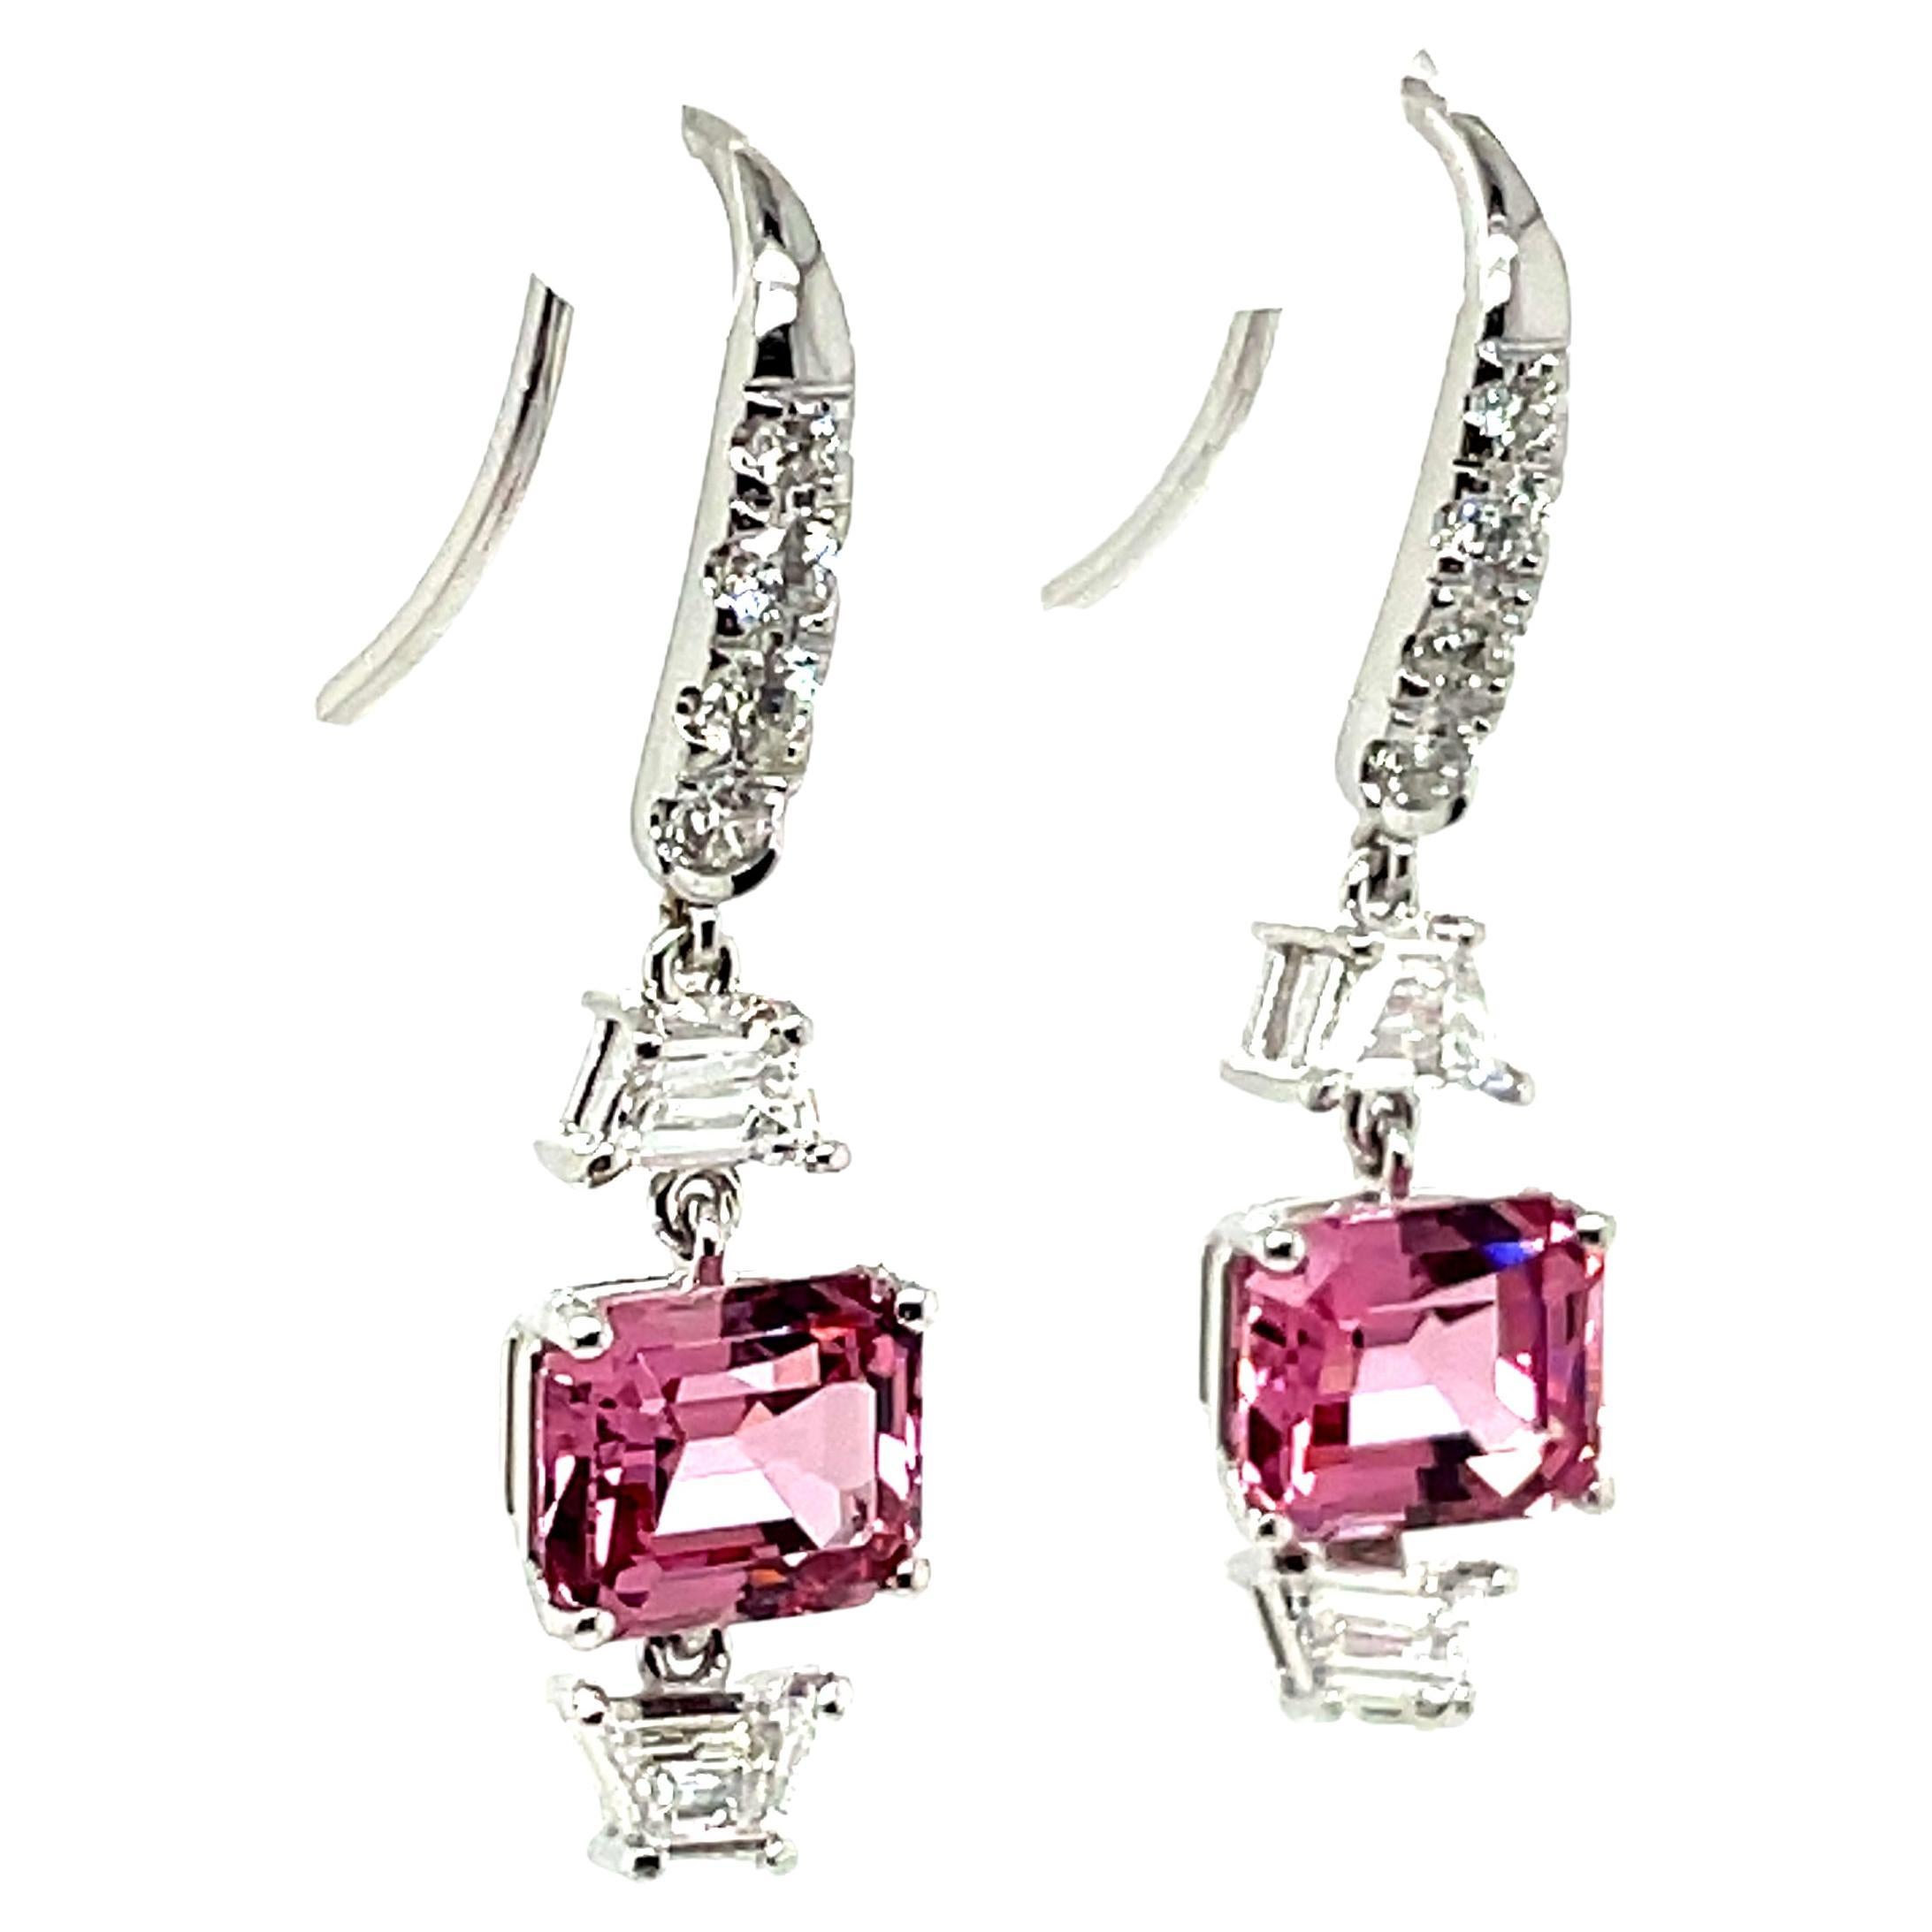 A statement duo that effortlessly blends chic style with glitz.
Featuring two beautiful pink spinels, weighing 4.21 cts, gracefully positioned between two
diamonds.

These pink spinels are exceptionally rare as they are free from any heat